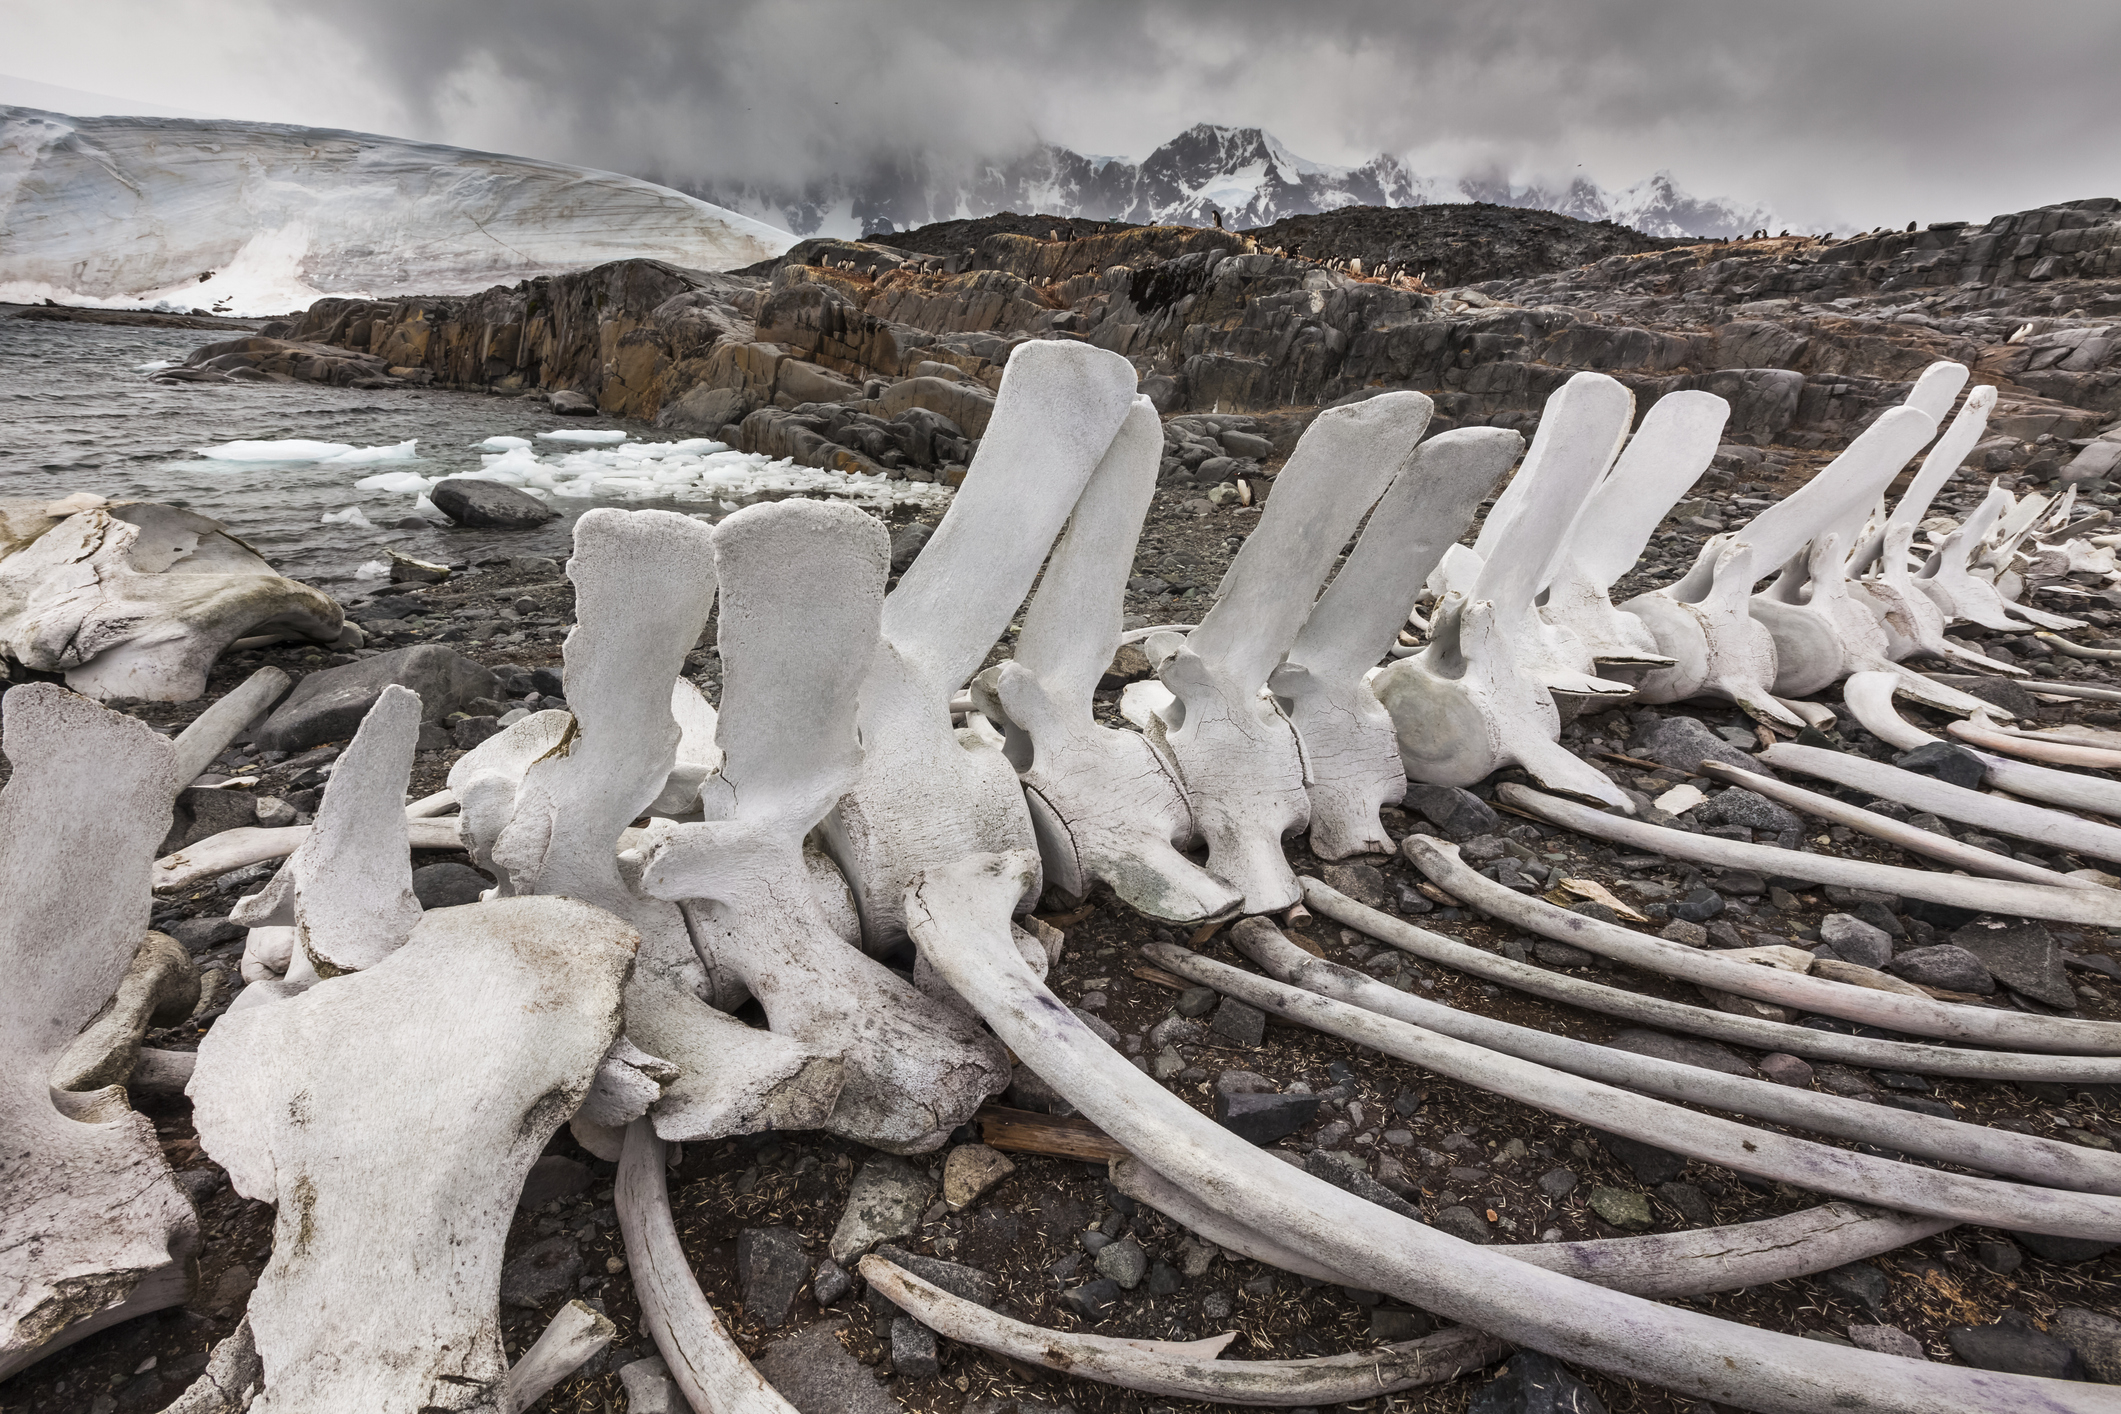 Whale bones scattered across a rocky landscape with snow-covered hills in the background